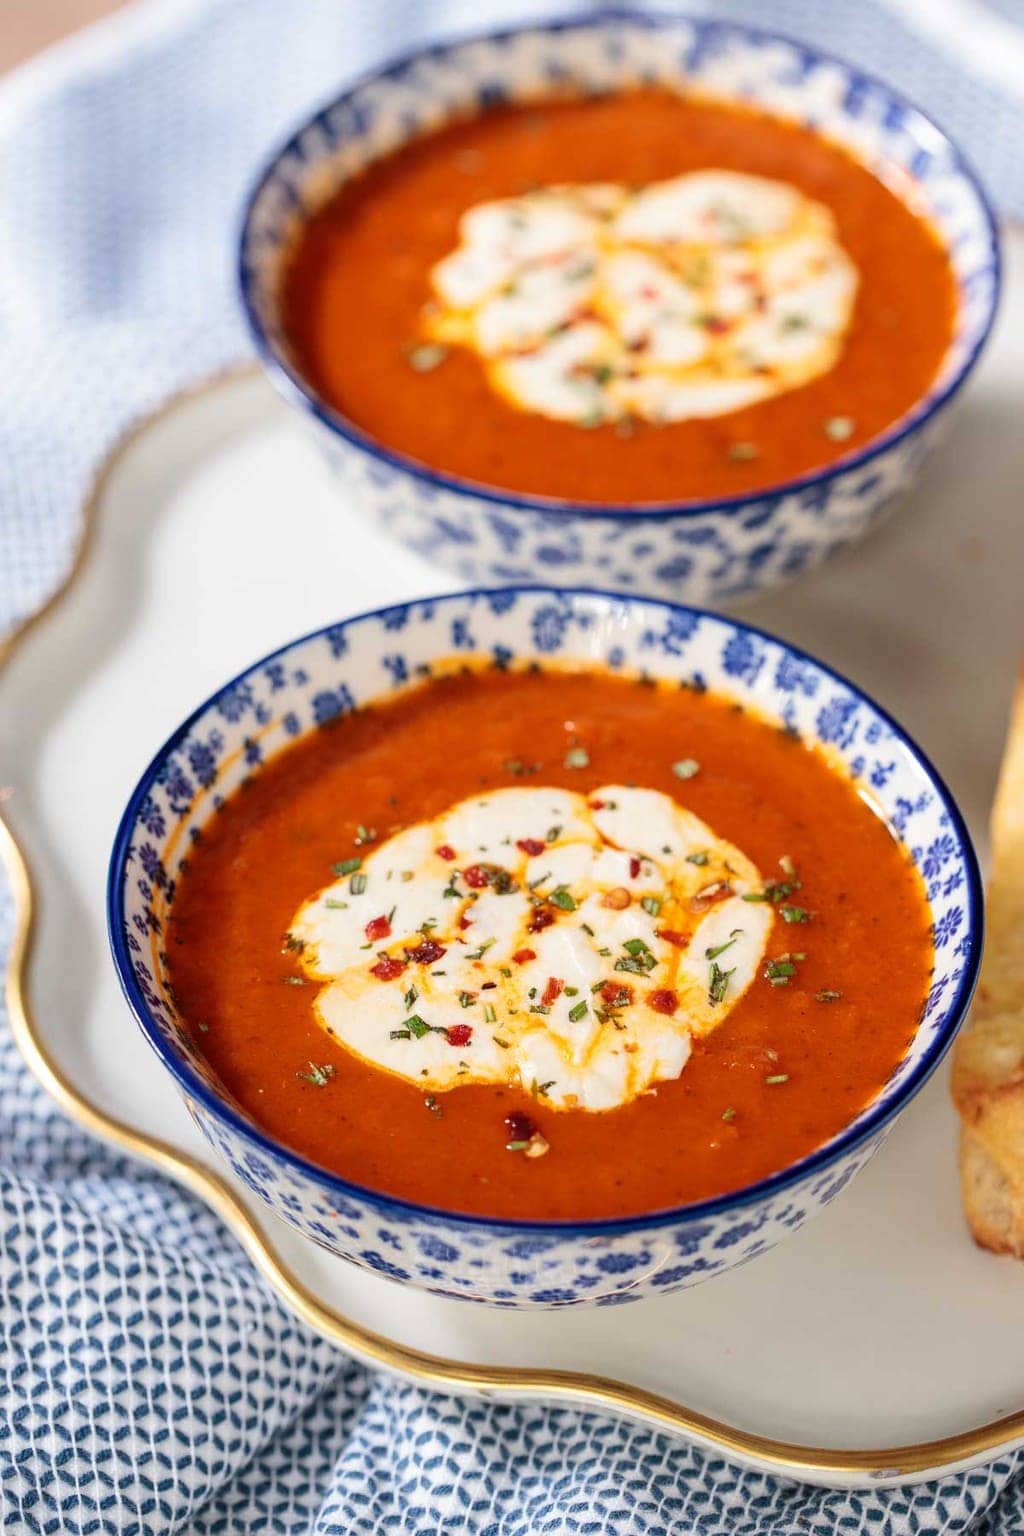 Vertical photo of Roasted Red Pepper Tomato Soup in blue and white bowls.